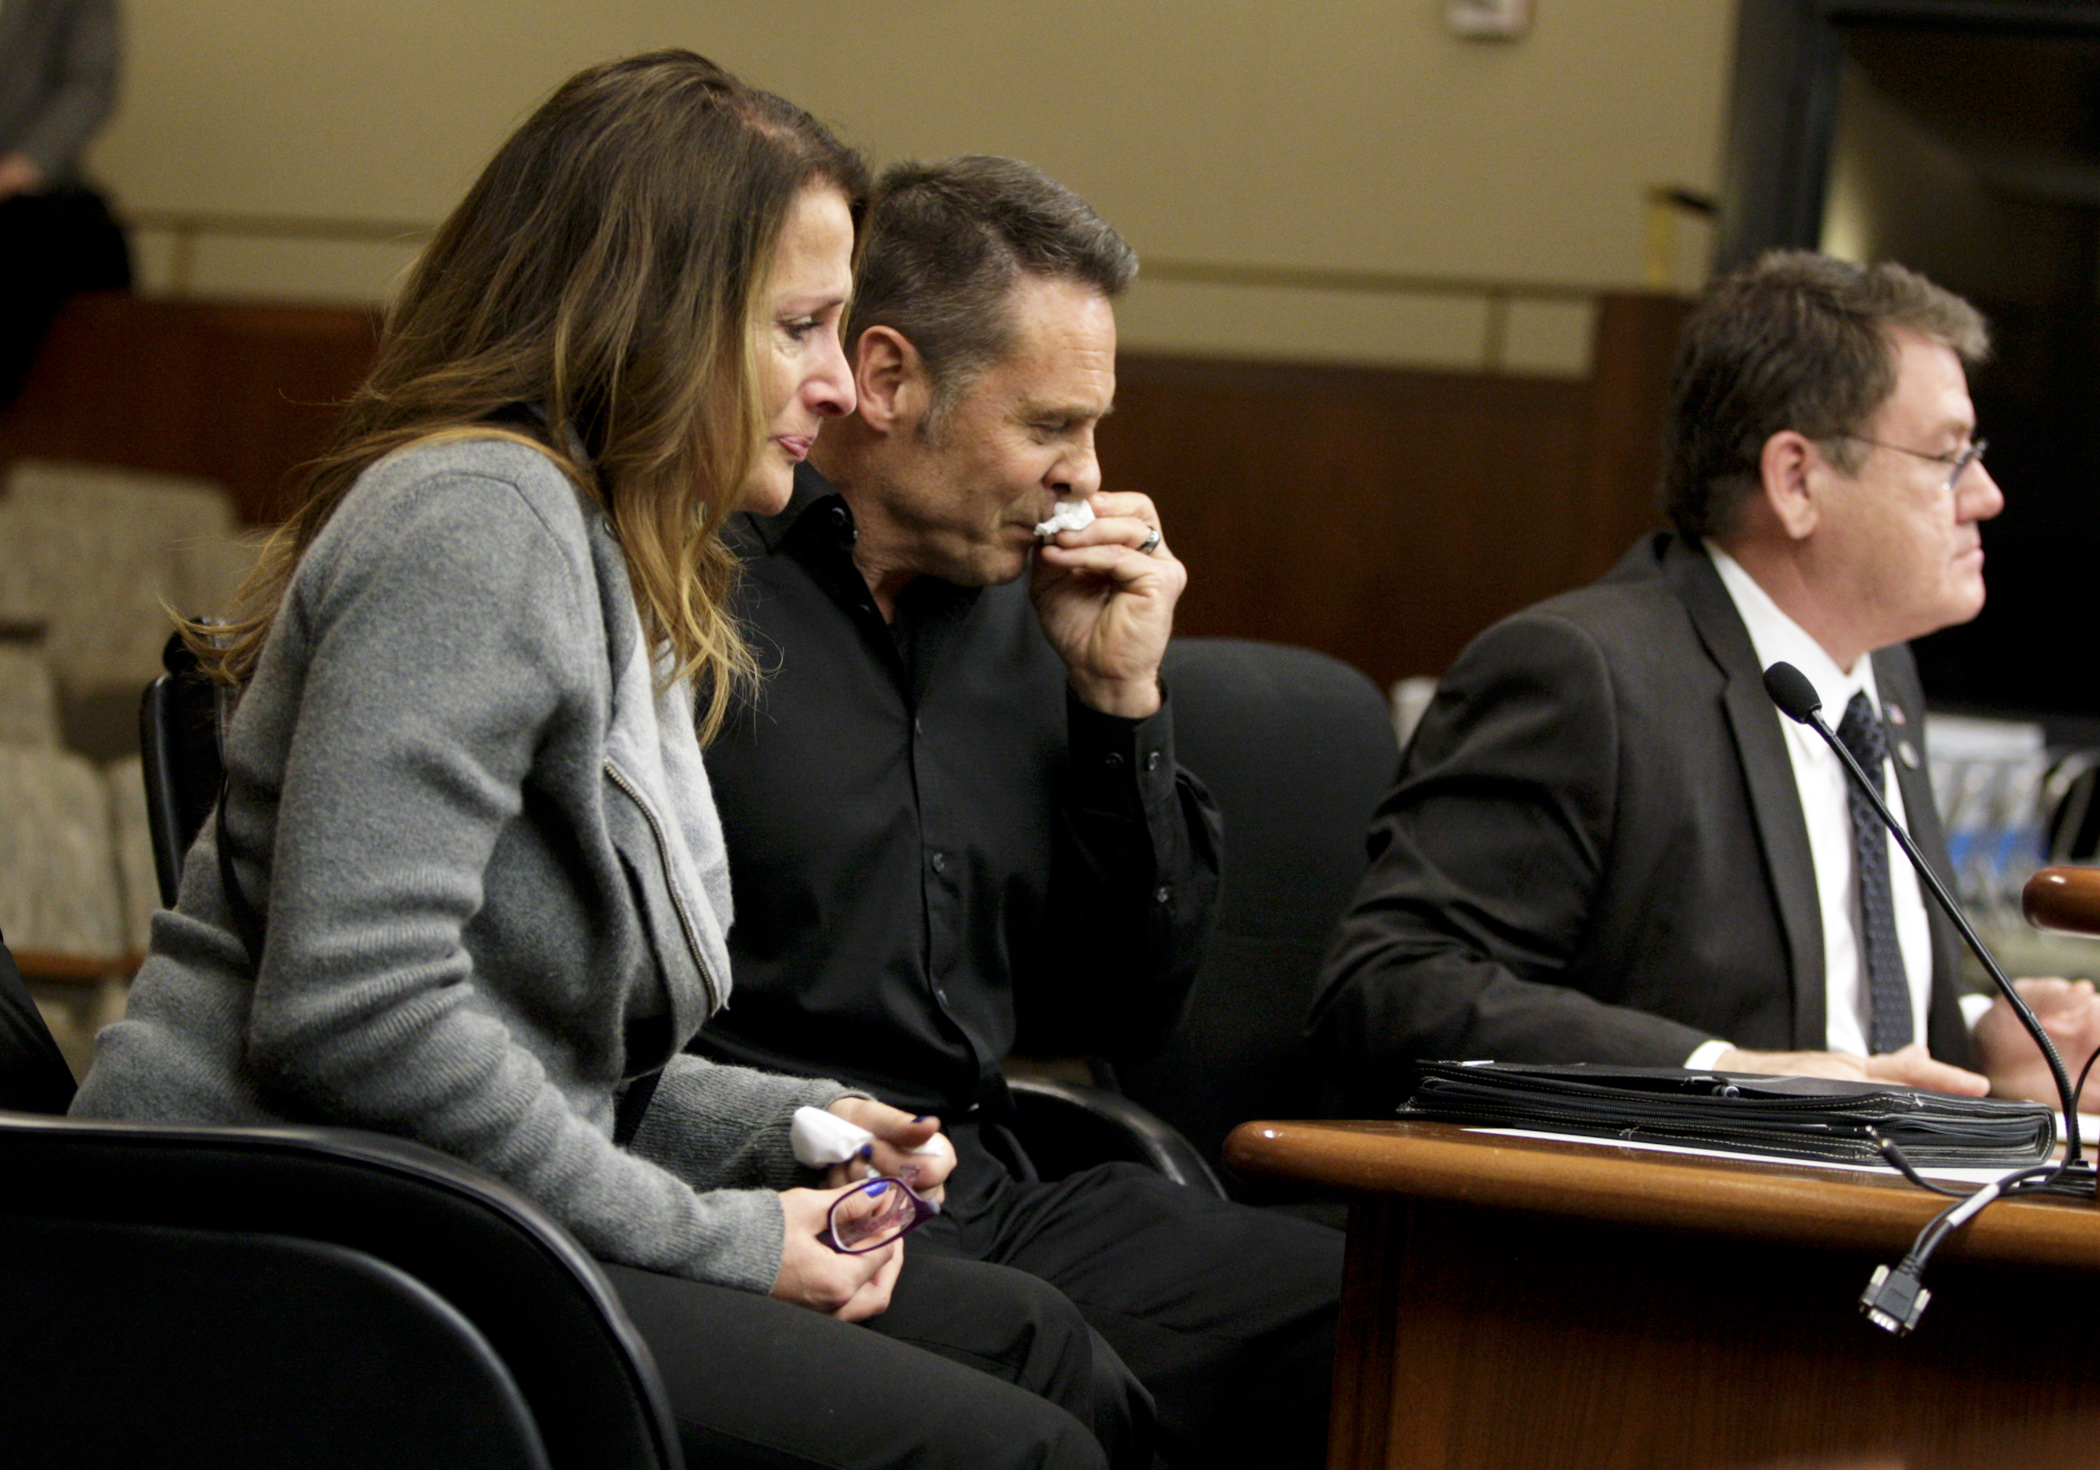 John and Julie Gleason provide emotional testimony March 3 about their son, Colton, who was killed by a recently released offender who had not yet been placed on electronic monitoring. Photo by Paul Battaglia